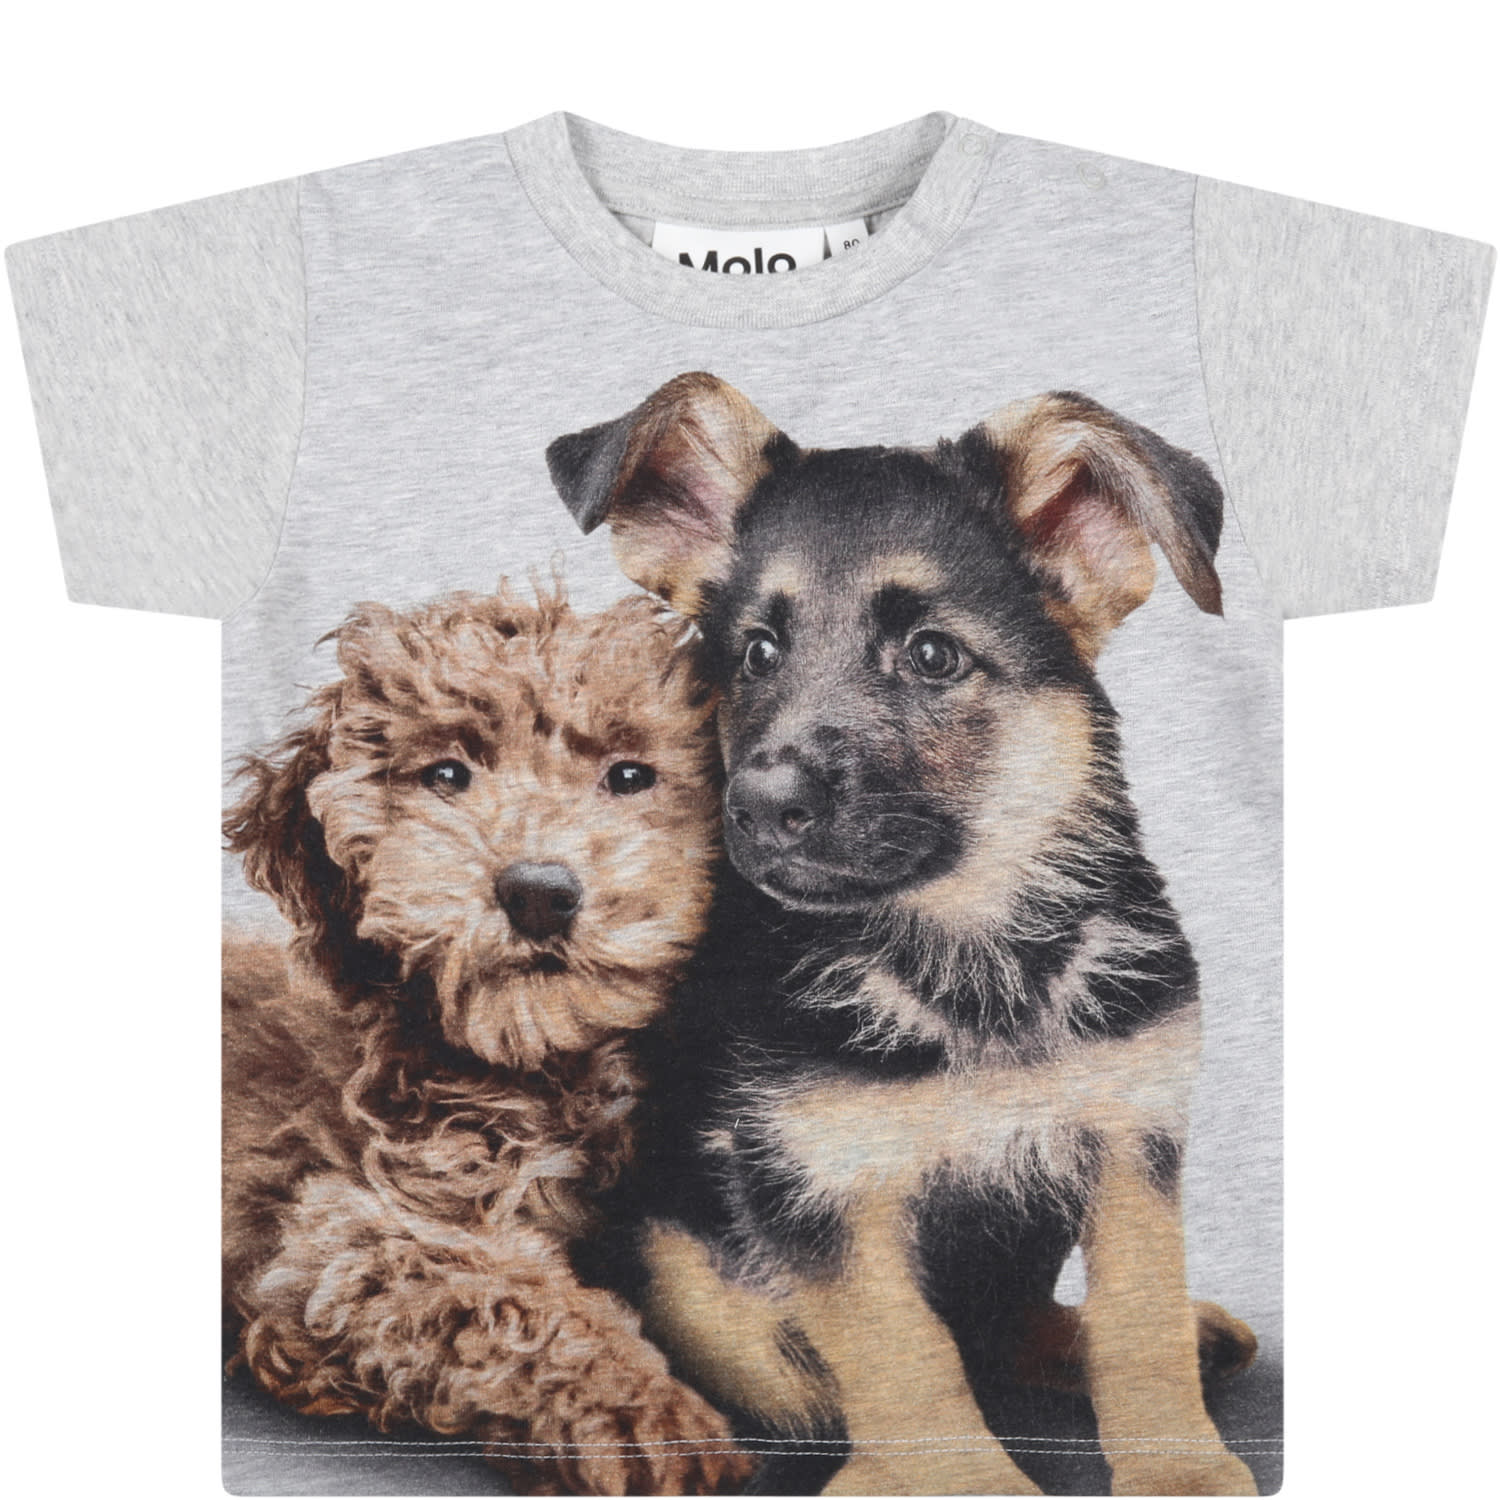 Molo Grey T-shirt For Baby Kids With Dogs